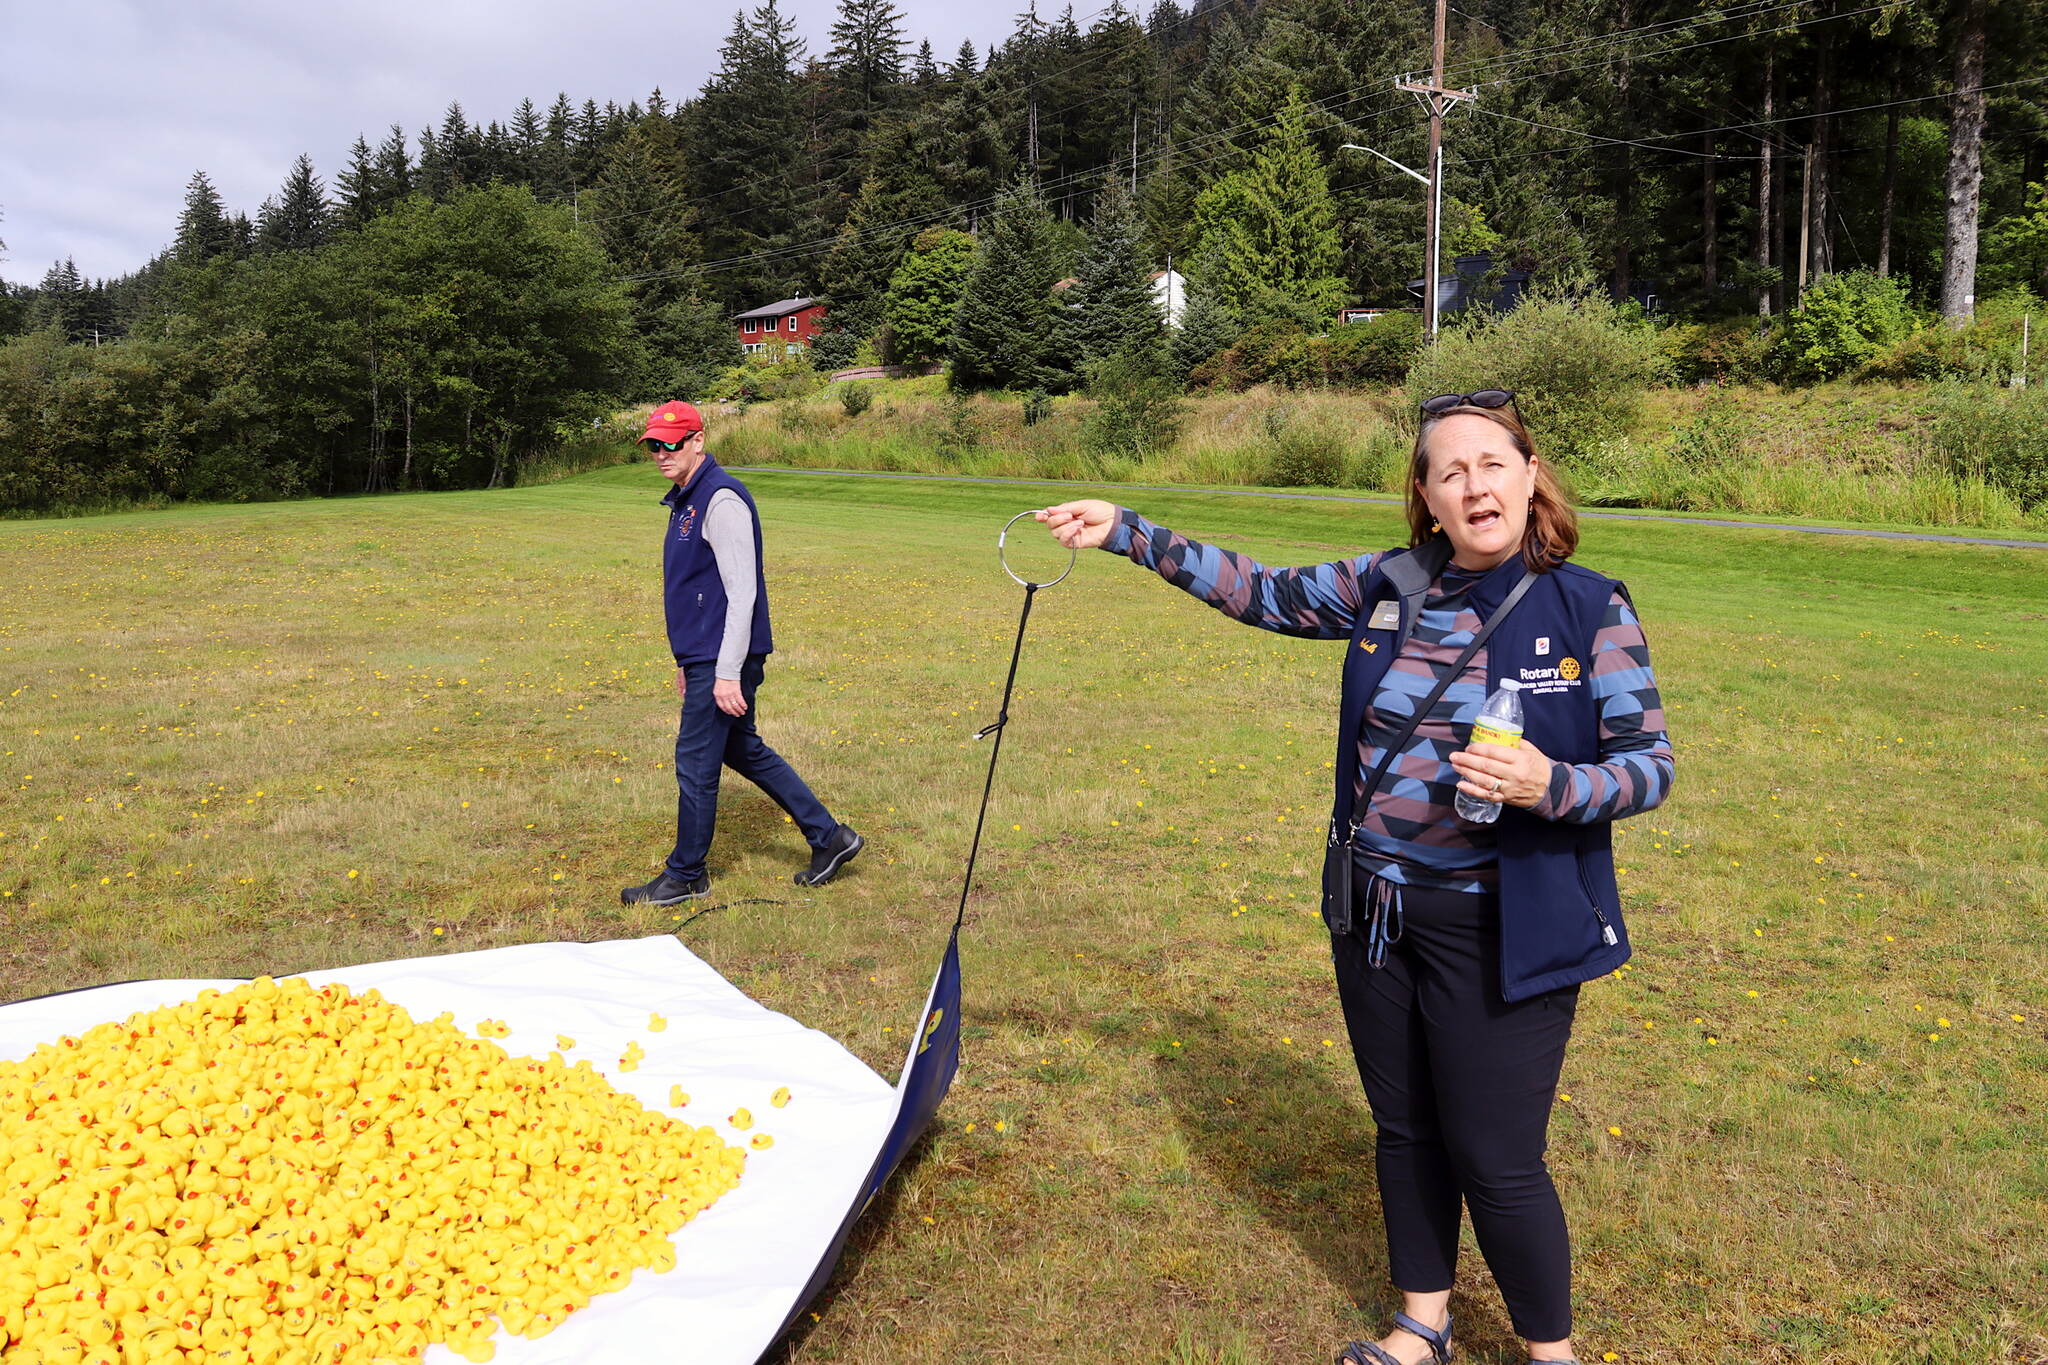 Michelle and Steve Strickler examine a net filled with rubber ducks before they are dropped from a helicopter into Twin Lakes on Saturday during the Glacier Valley Rotary Duck Derby. (Meredith Jordan / Juneau Empire)